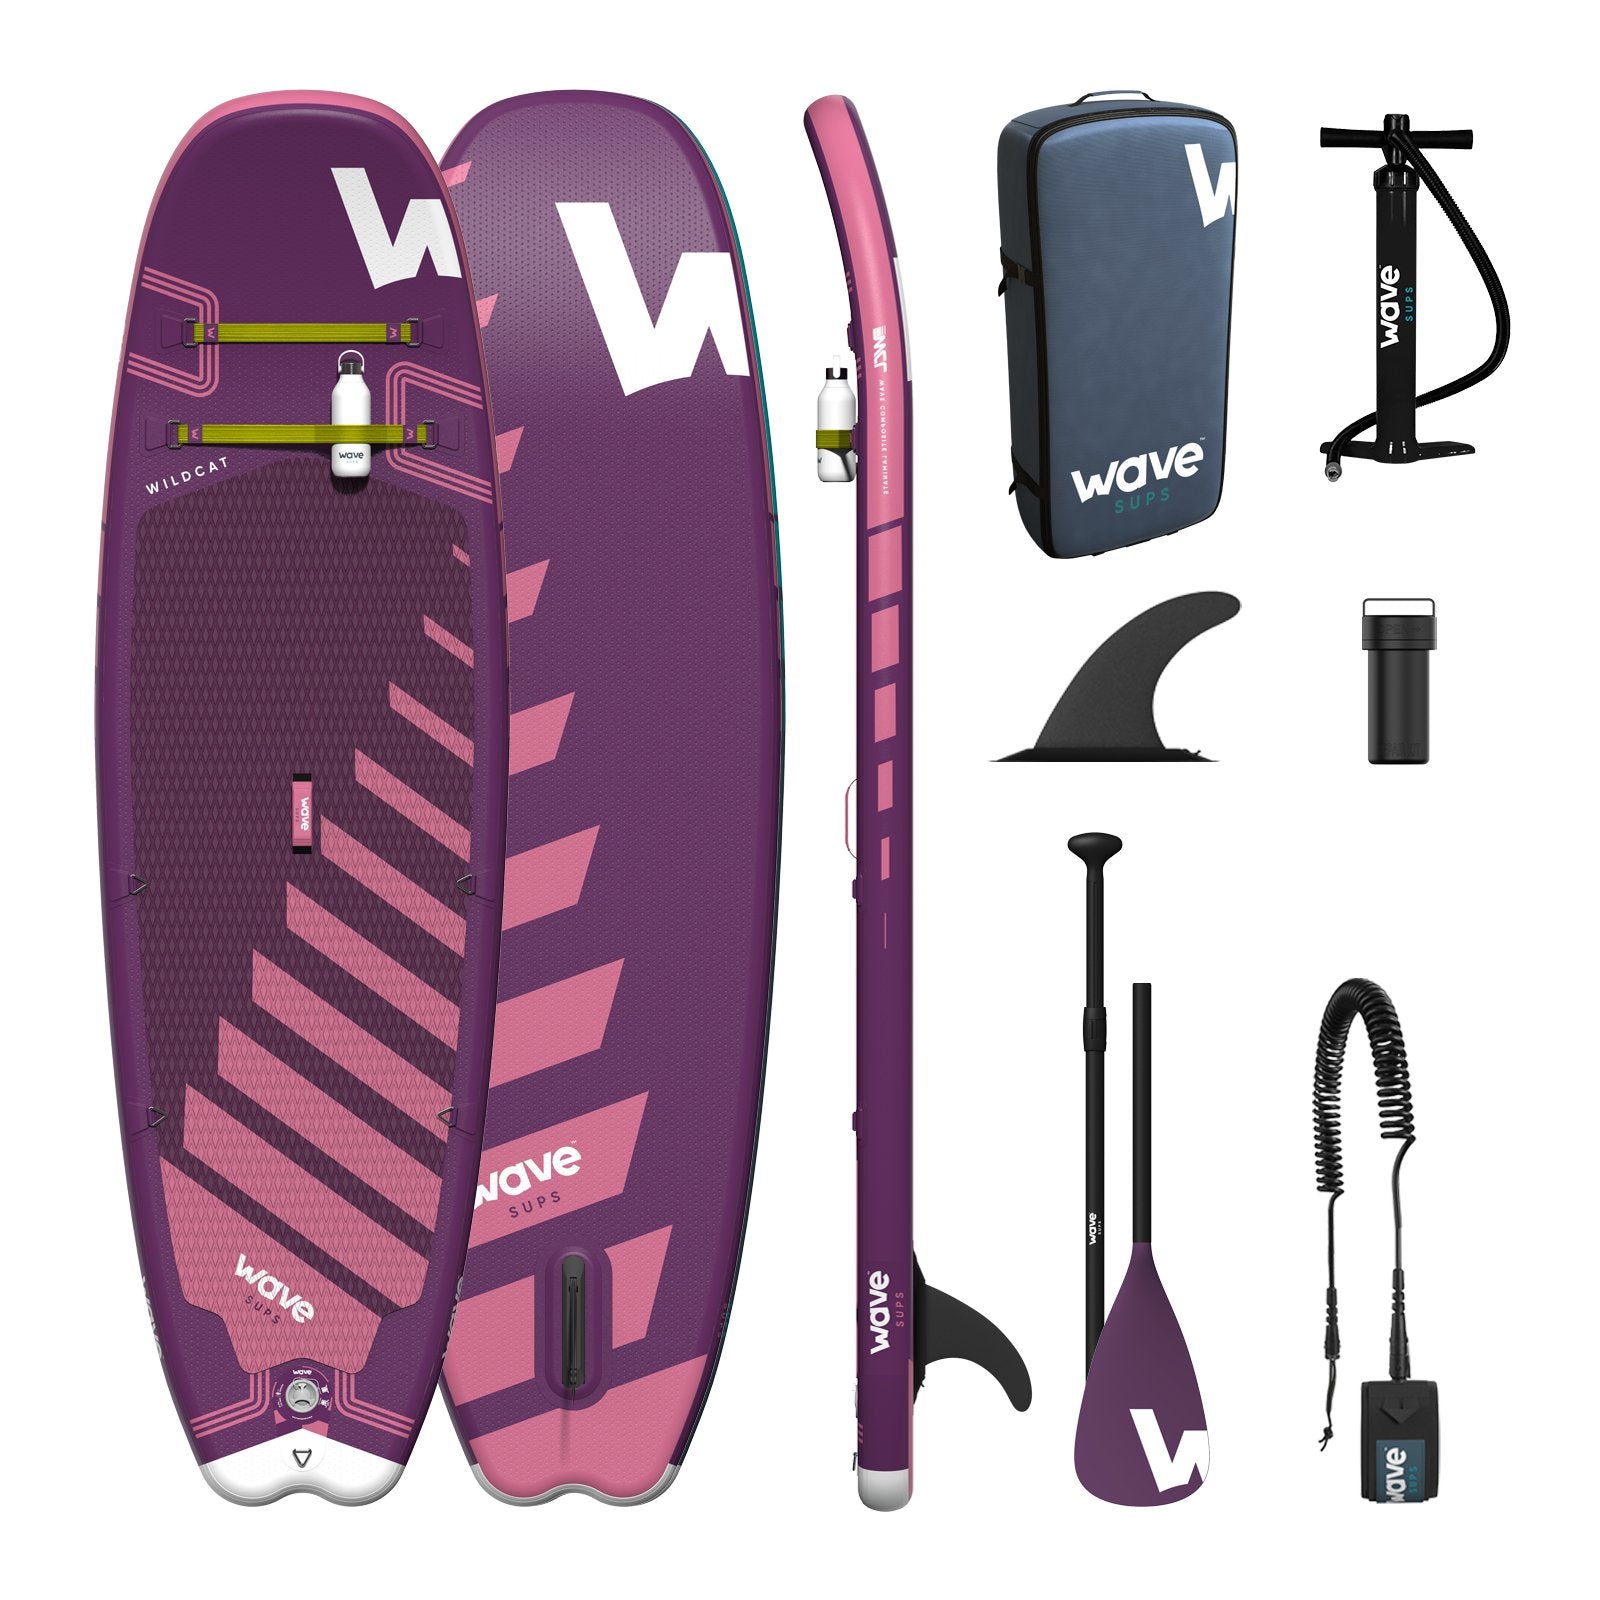 Wildcat SUP | Inflatable Stand-Up Paddleboard | 8.6ft | Purple - Wave Sups EU